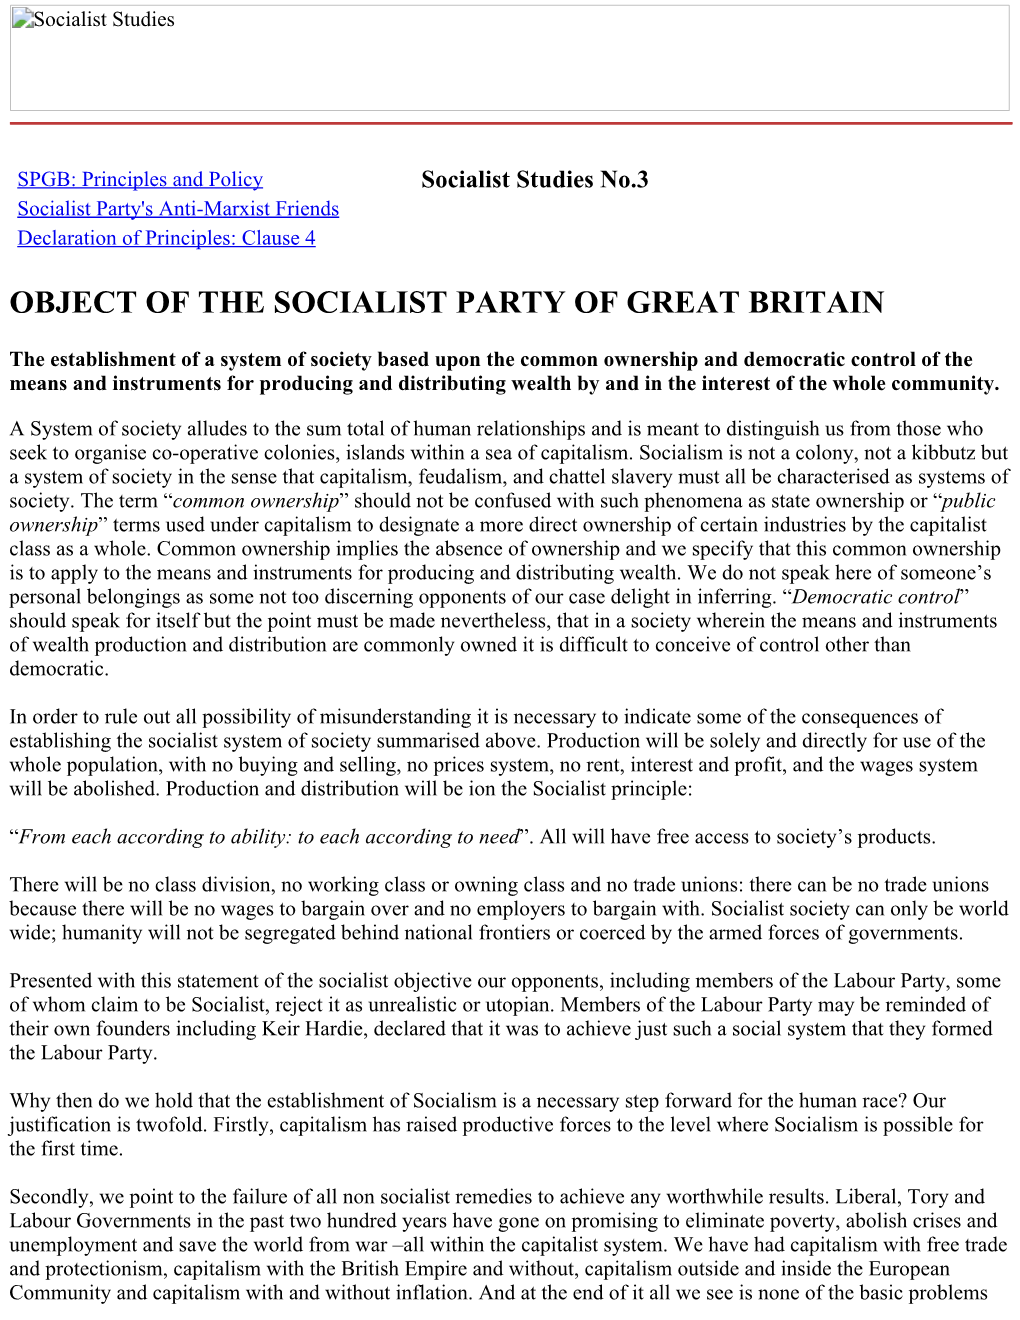 Object of the Socialist Party of Great Britain